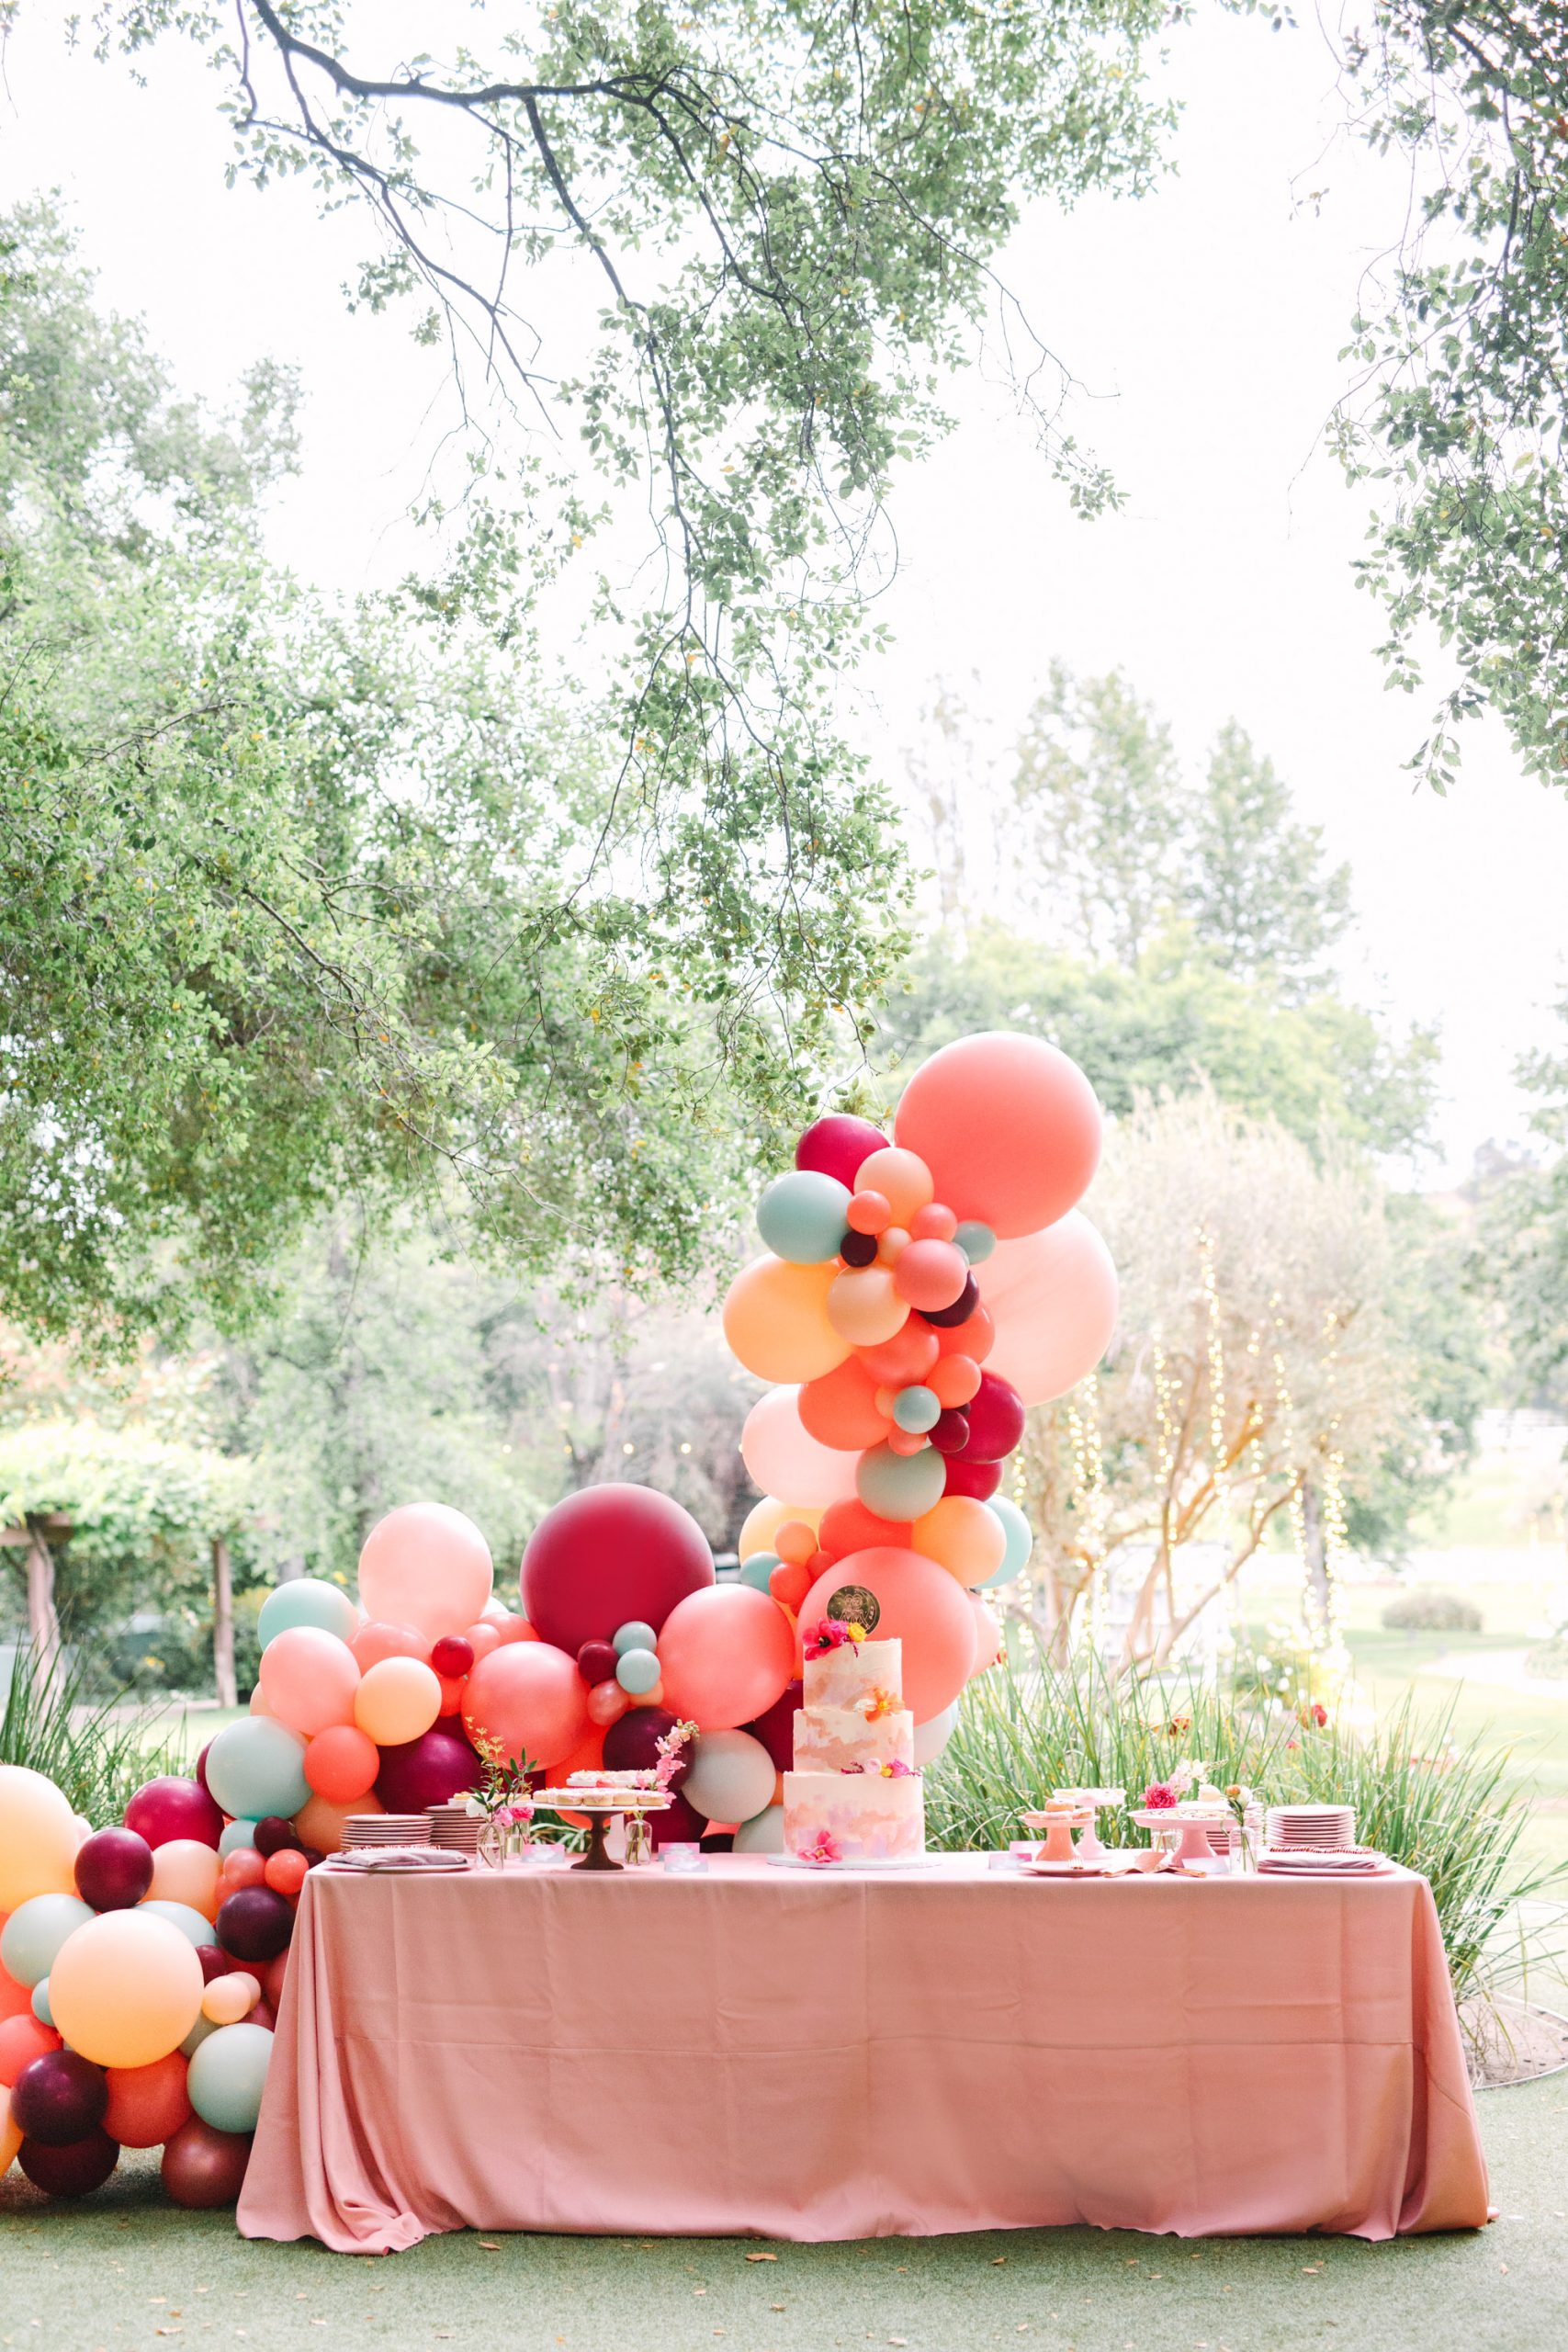 Balloon arch display by Mary Costa Photography